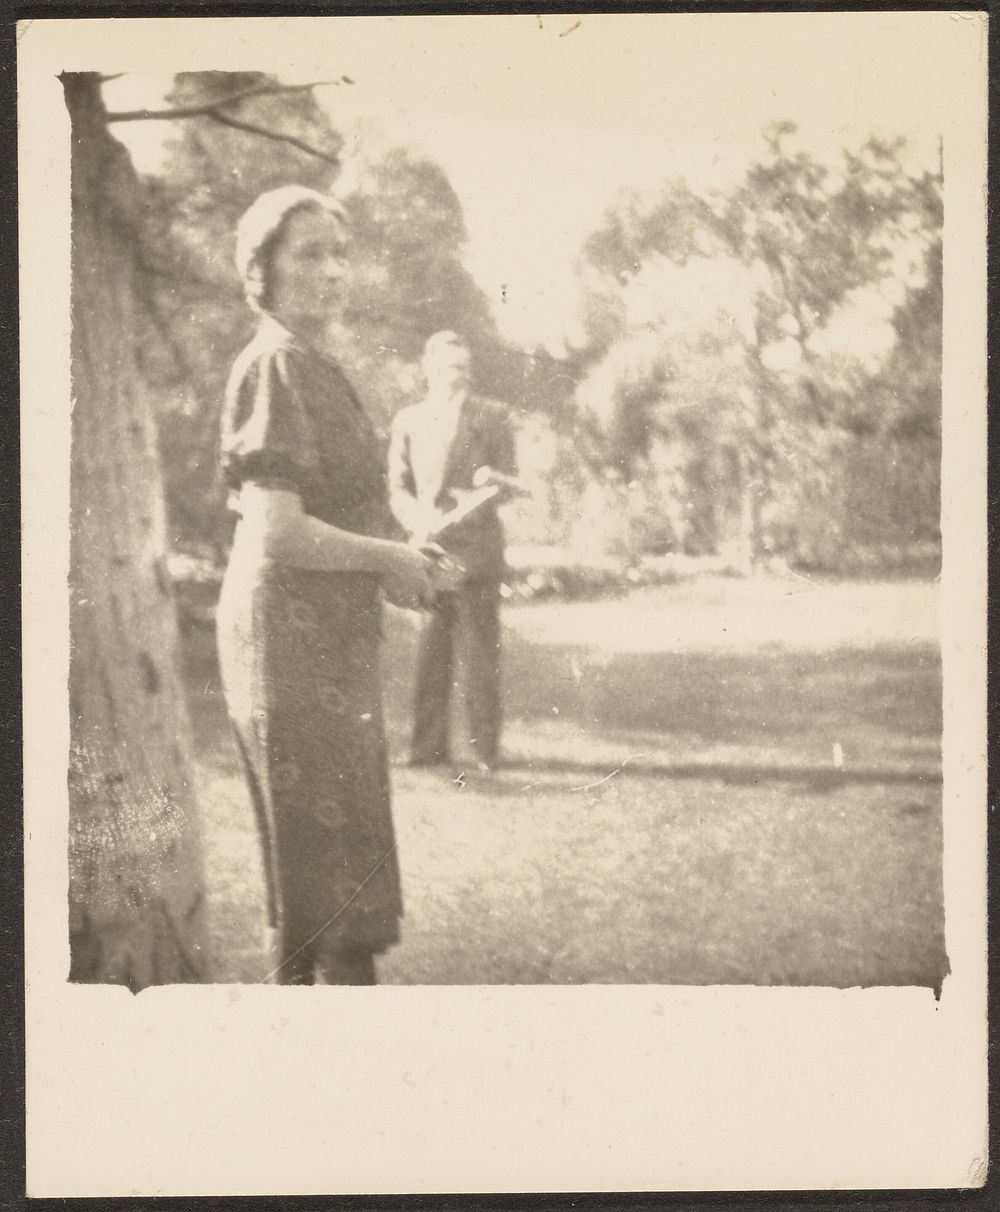 Man and Woman Playing Croquet by Louis Fleckenstein